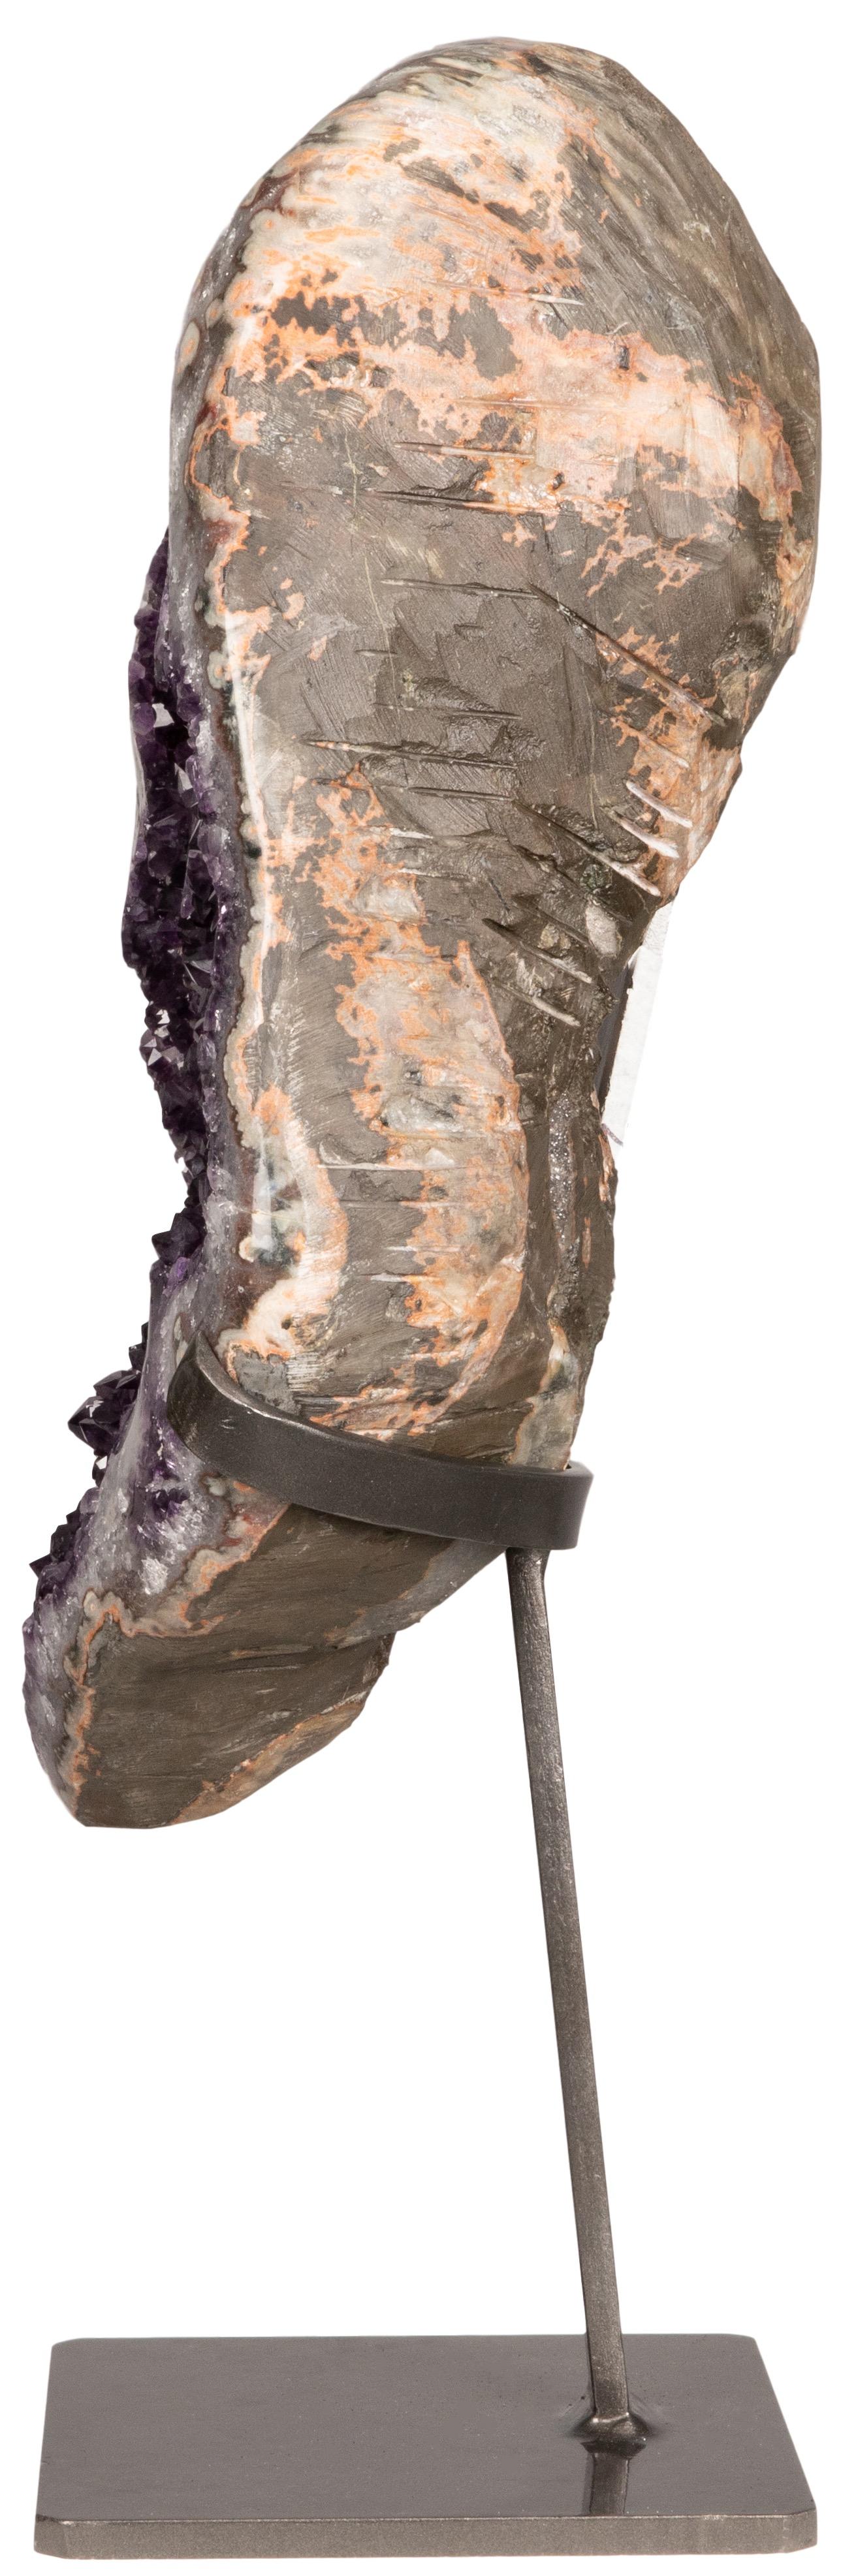 This natural sculpture presents the viewer with deep purple amethyst and a variety of color due to white quartz, green celadonite, and some artful inflections of pink and orange agate. 

The cut and polished stalactites on the interior are